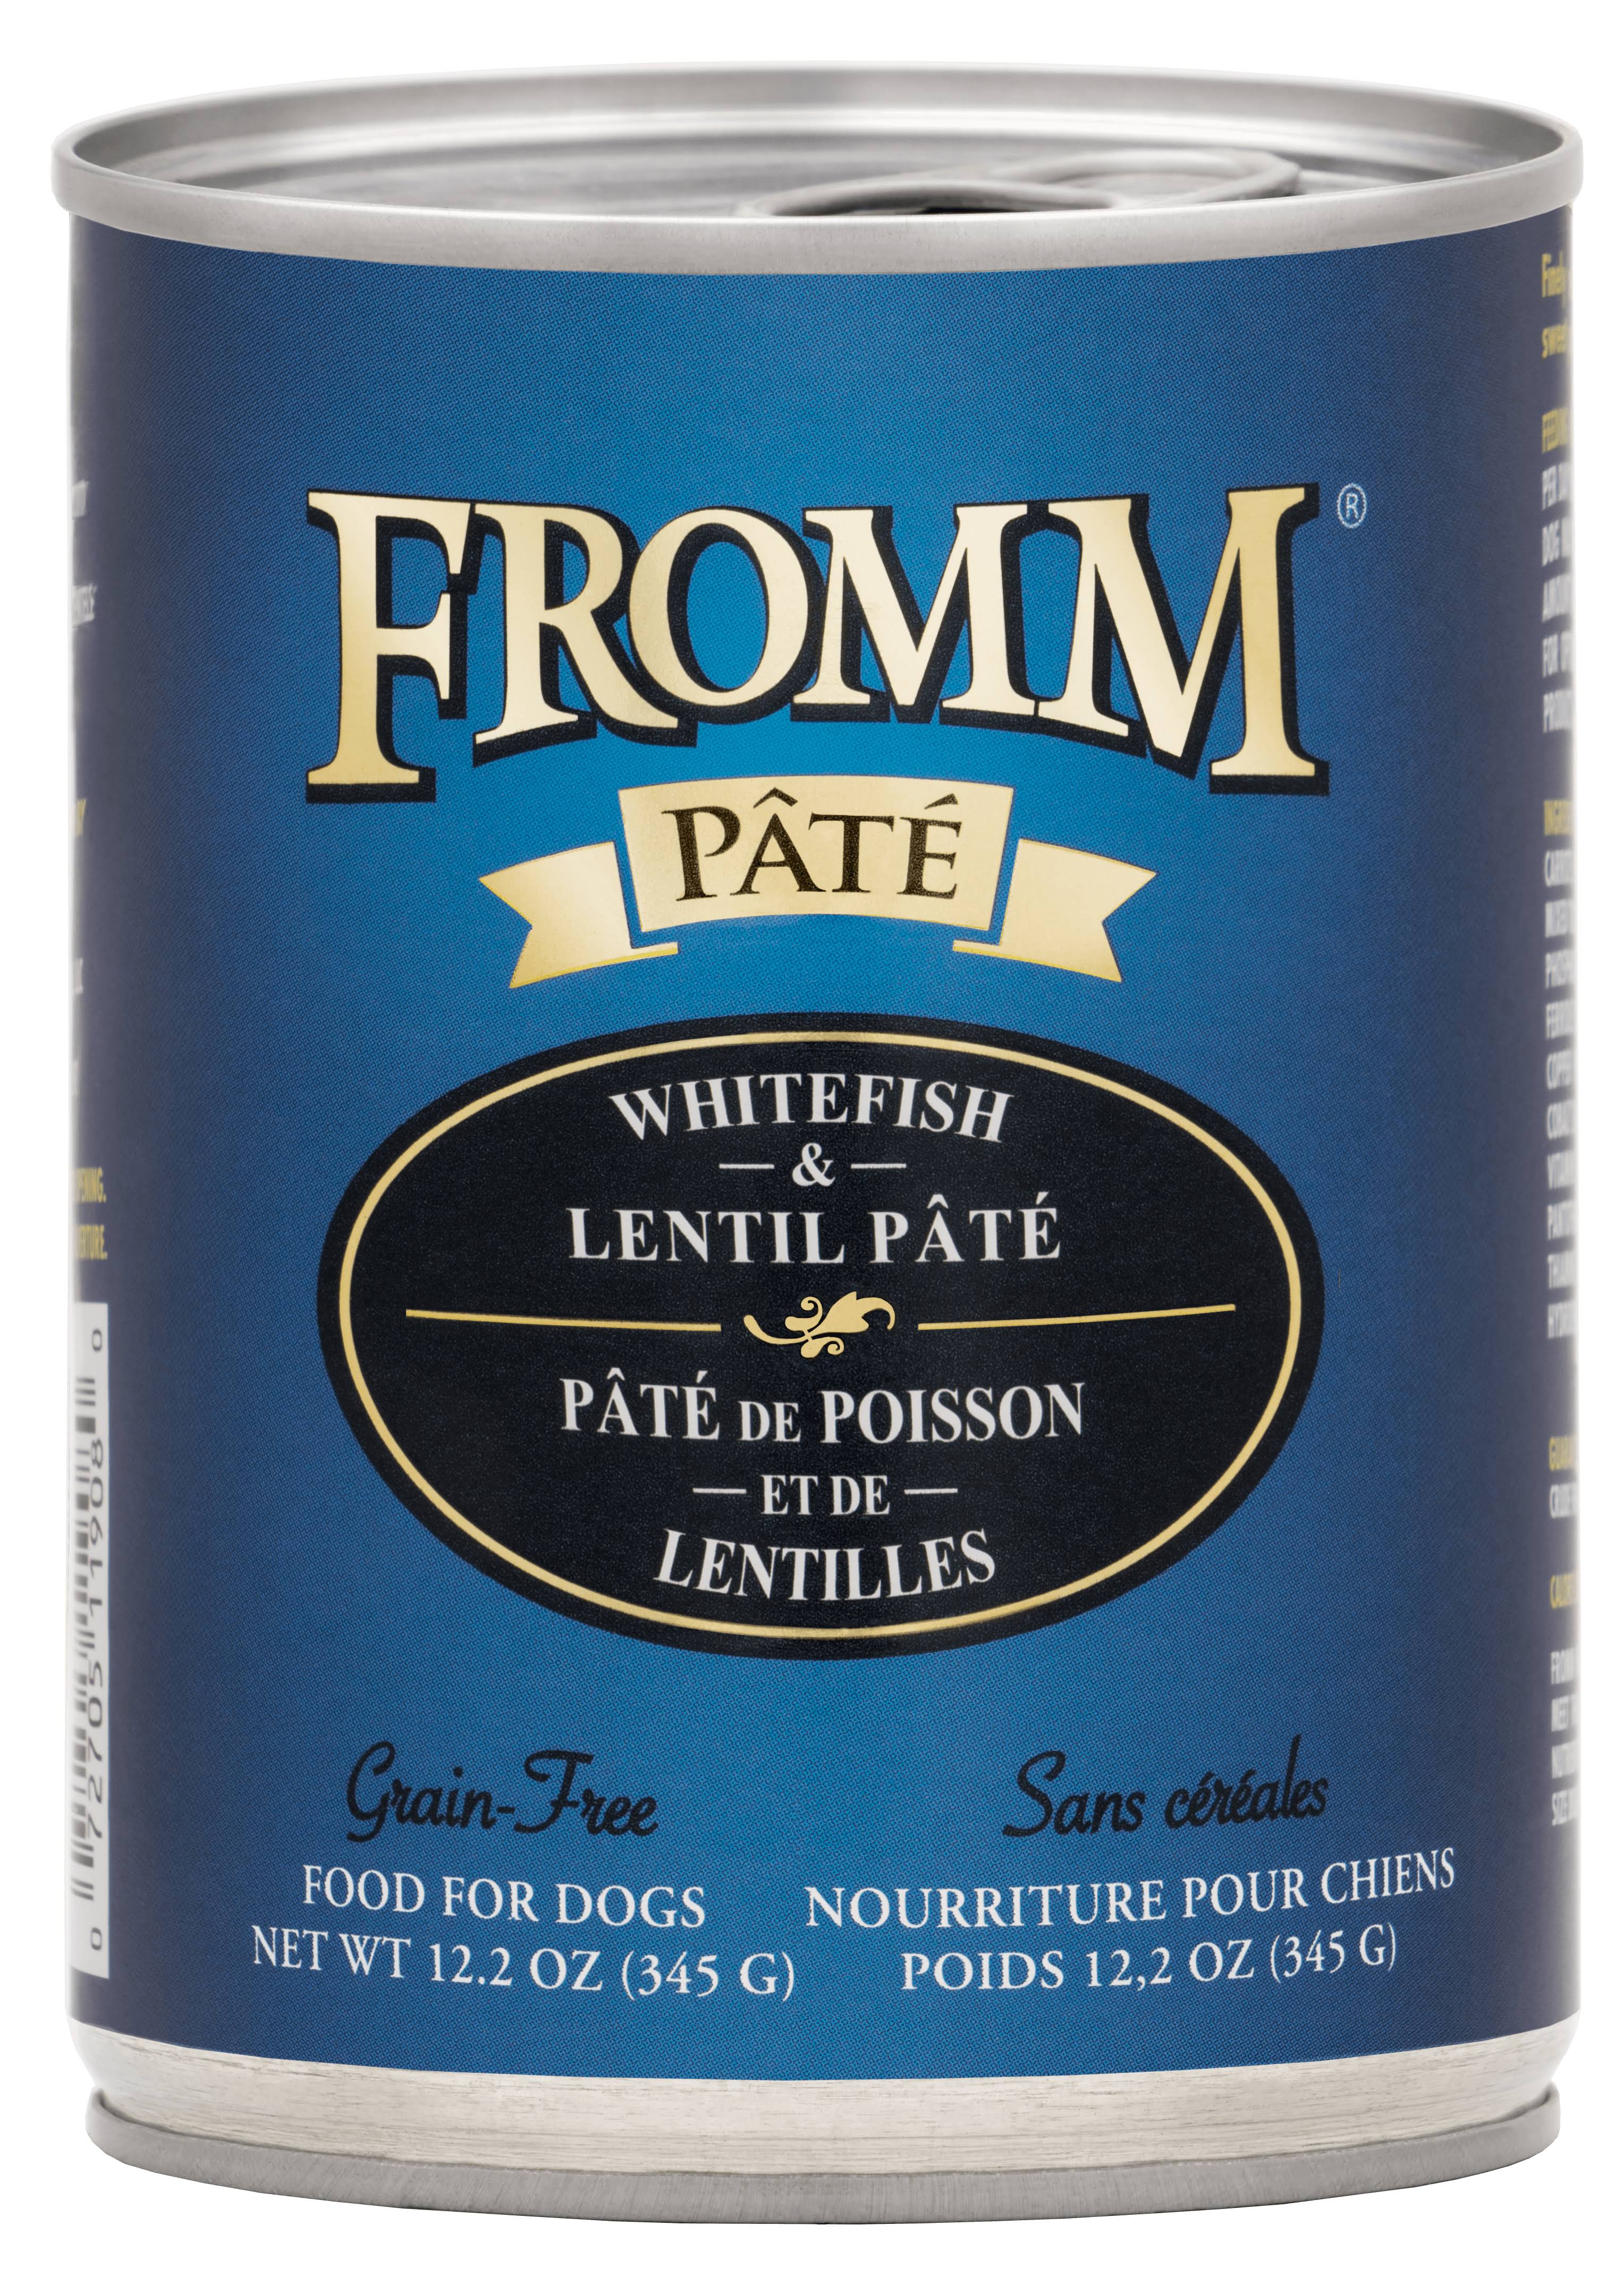 Fromm Whitefish & Lentil Pate Canned Dog Food - 12.2oz